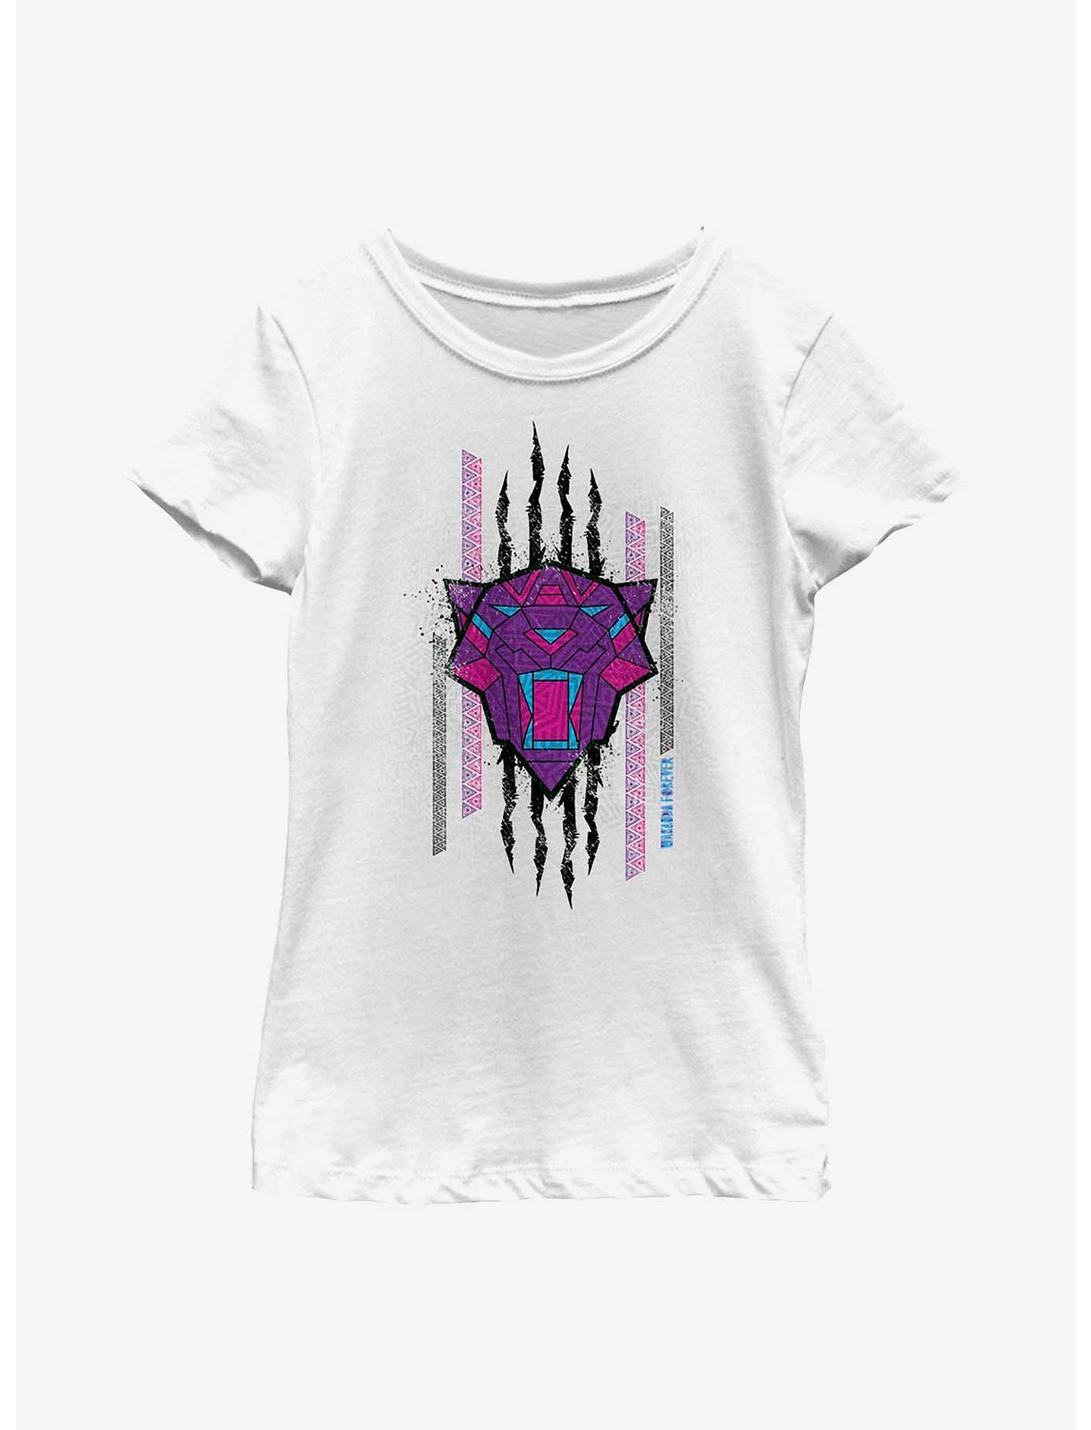 Marvel Black Panther: Wakanda Forever Panther Scratch Youth Girls T-Shirt, WHITE, hi-res